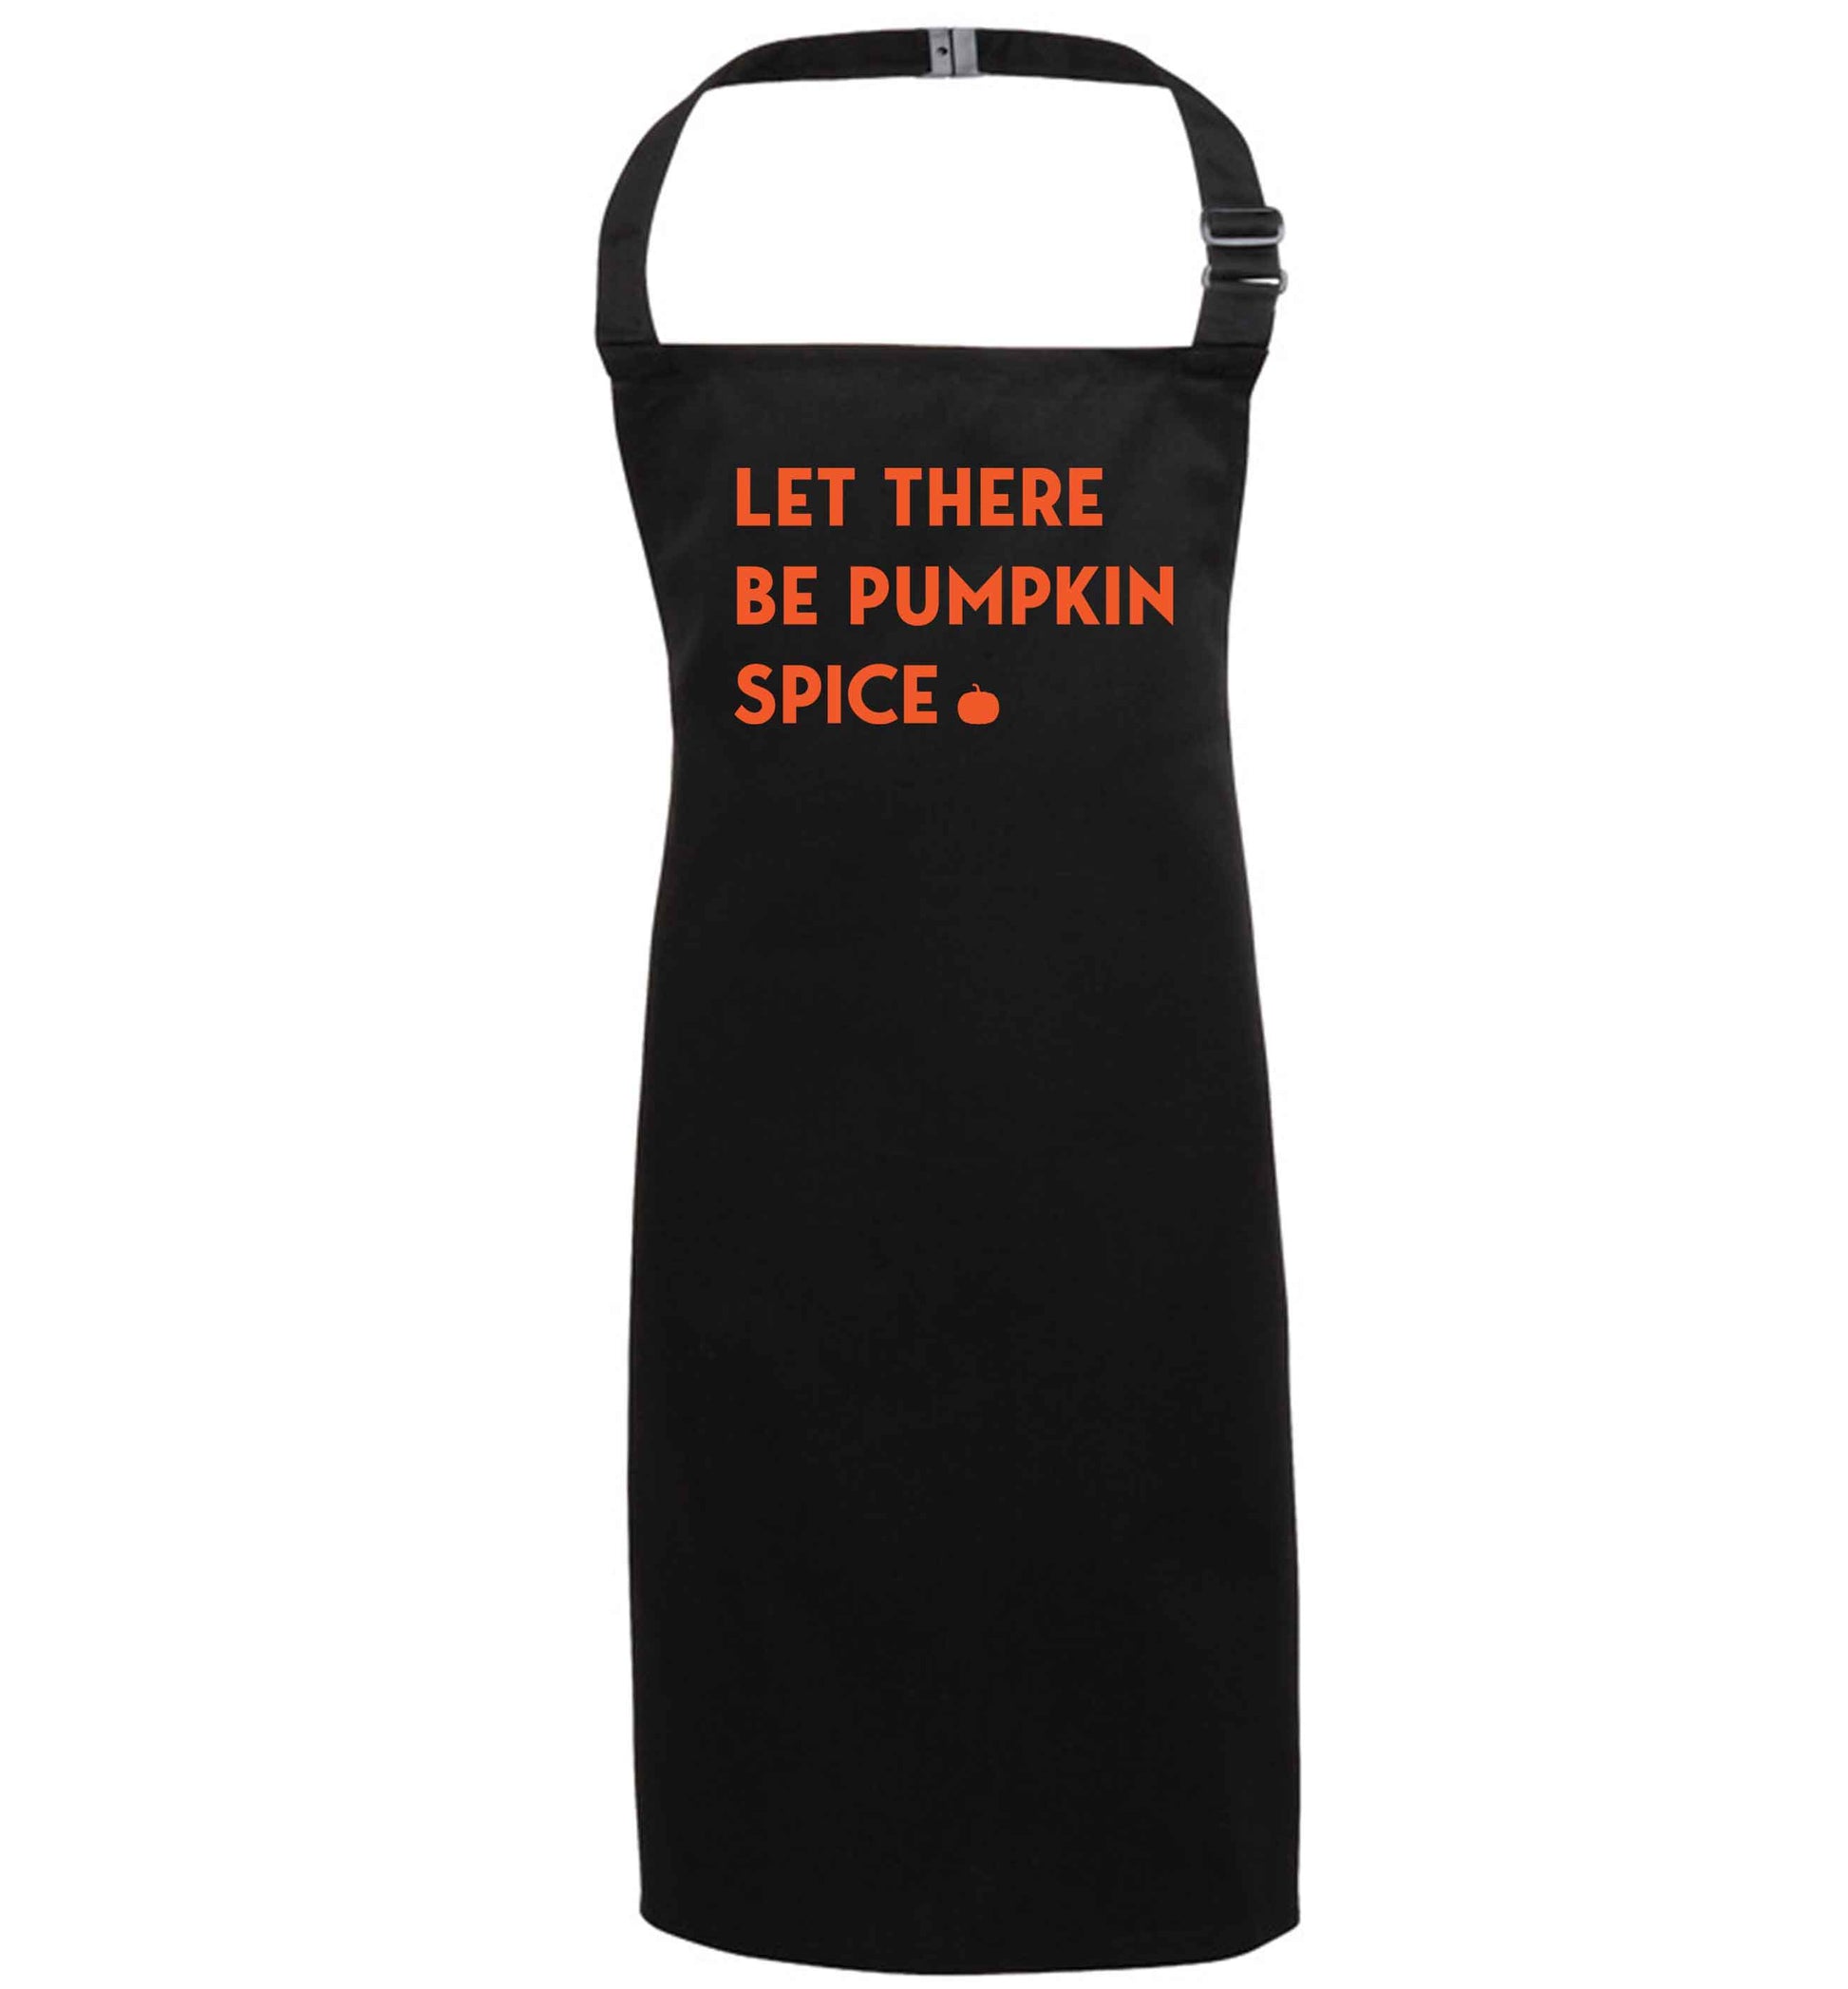 Let Be Pumpkin Spice black apron 7-10 years